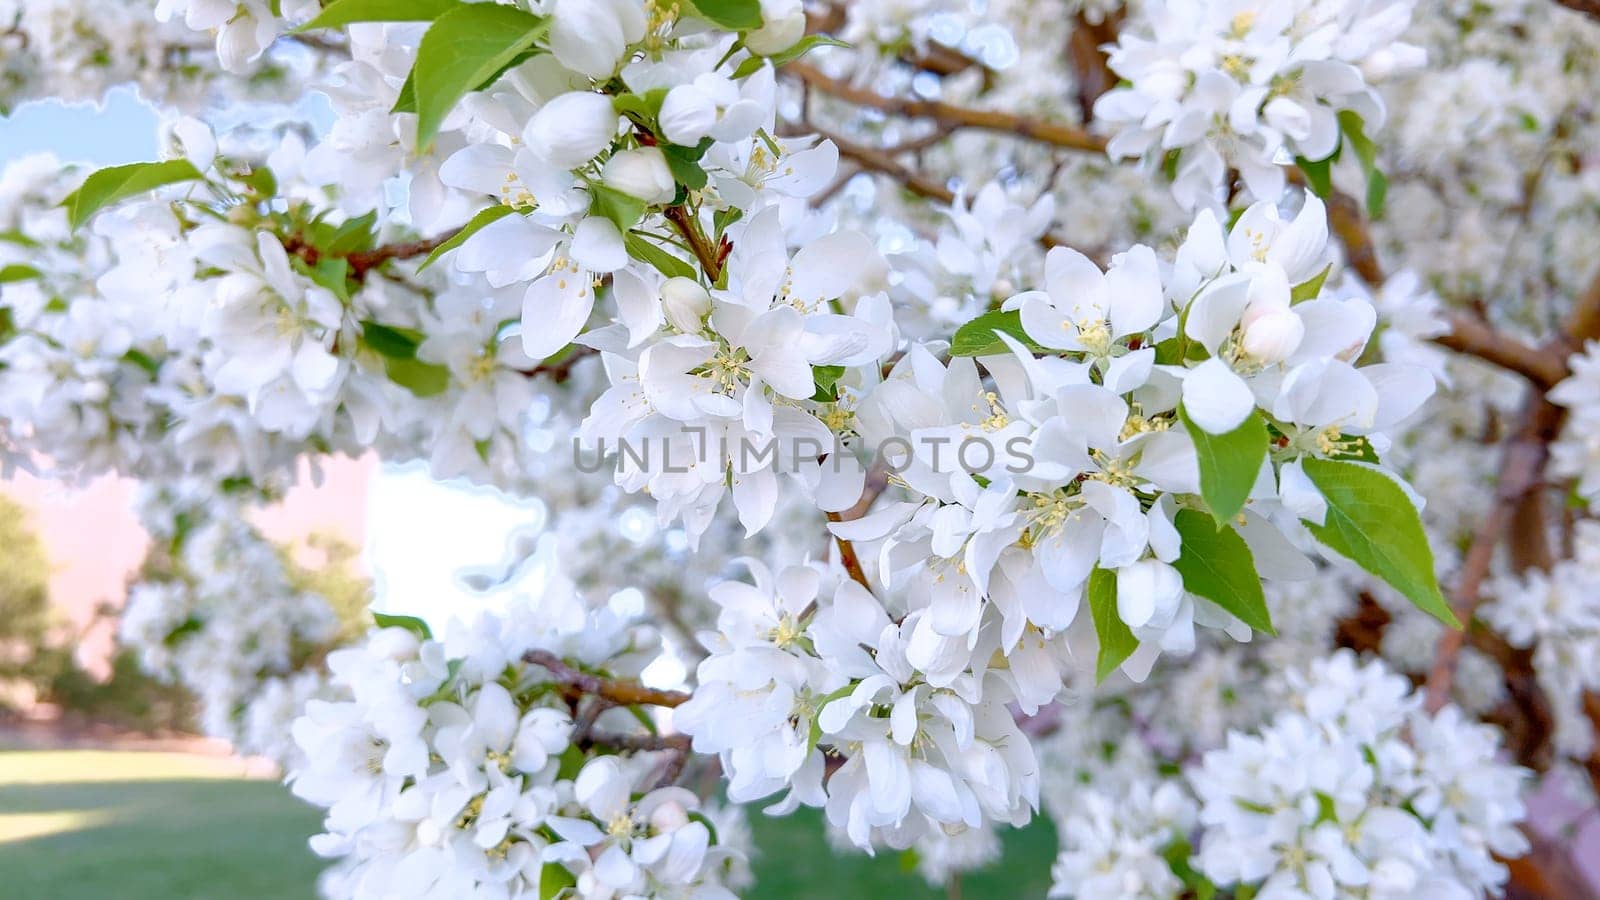 A vibrant cluster of white blossoms is in full bloom, delicately hanging from the branches of a tree, signaling the arrival of spring with their fresh, floral display.